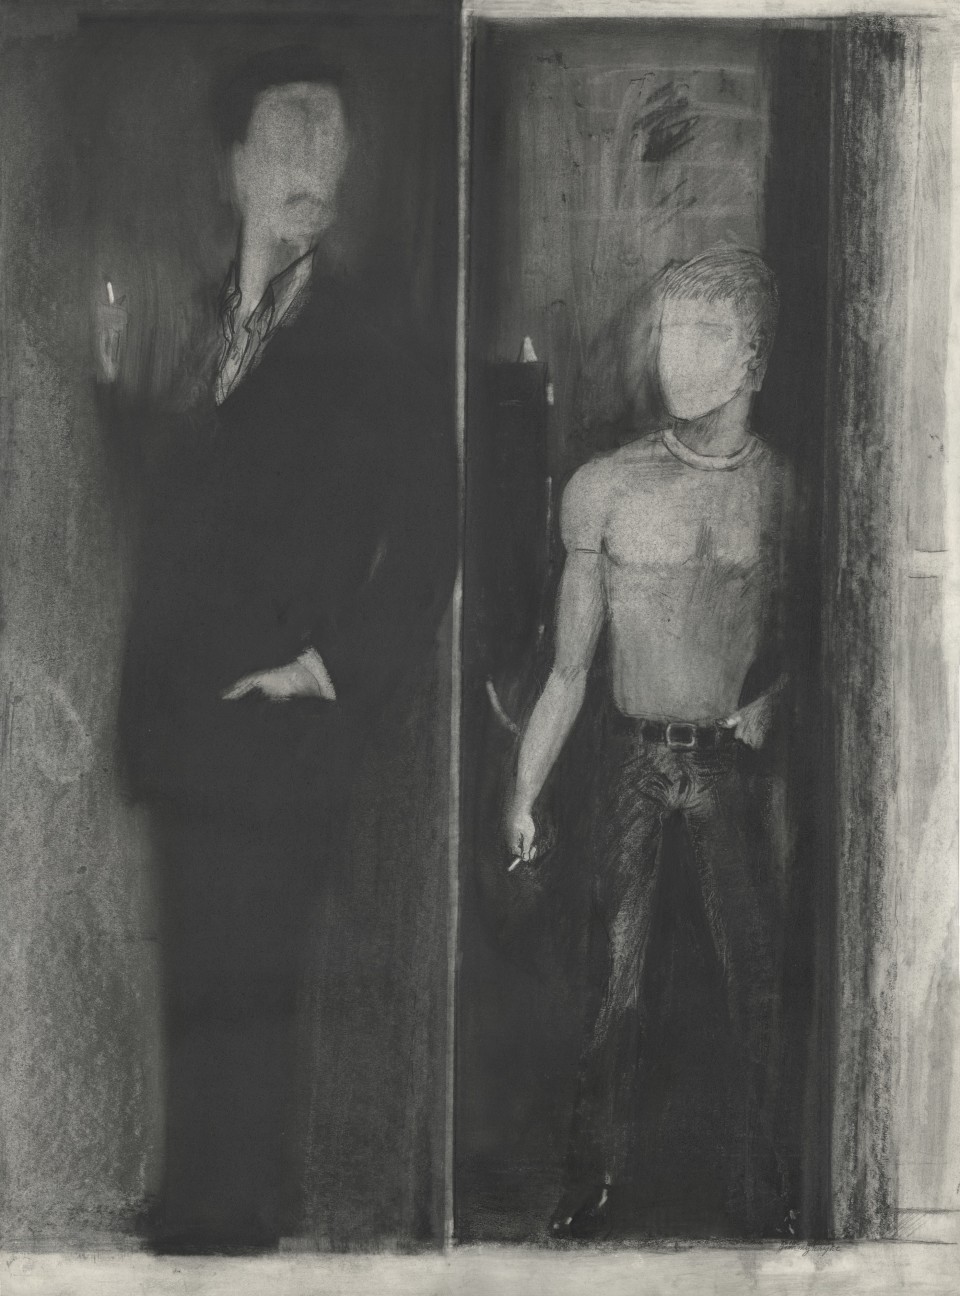 Image: Jimmy Wright  Hustler, 1975  graphite on paper  30 x 22 inches (76.2 x 55.9 cm)